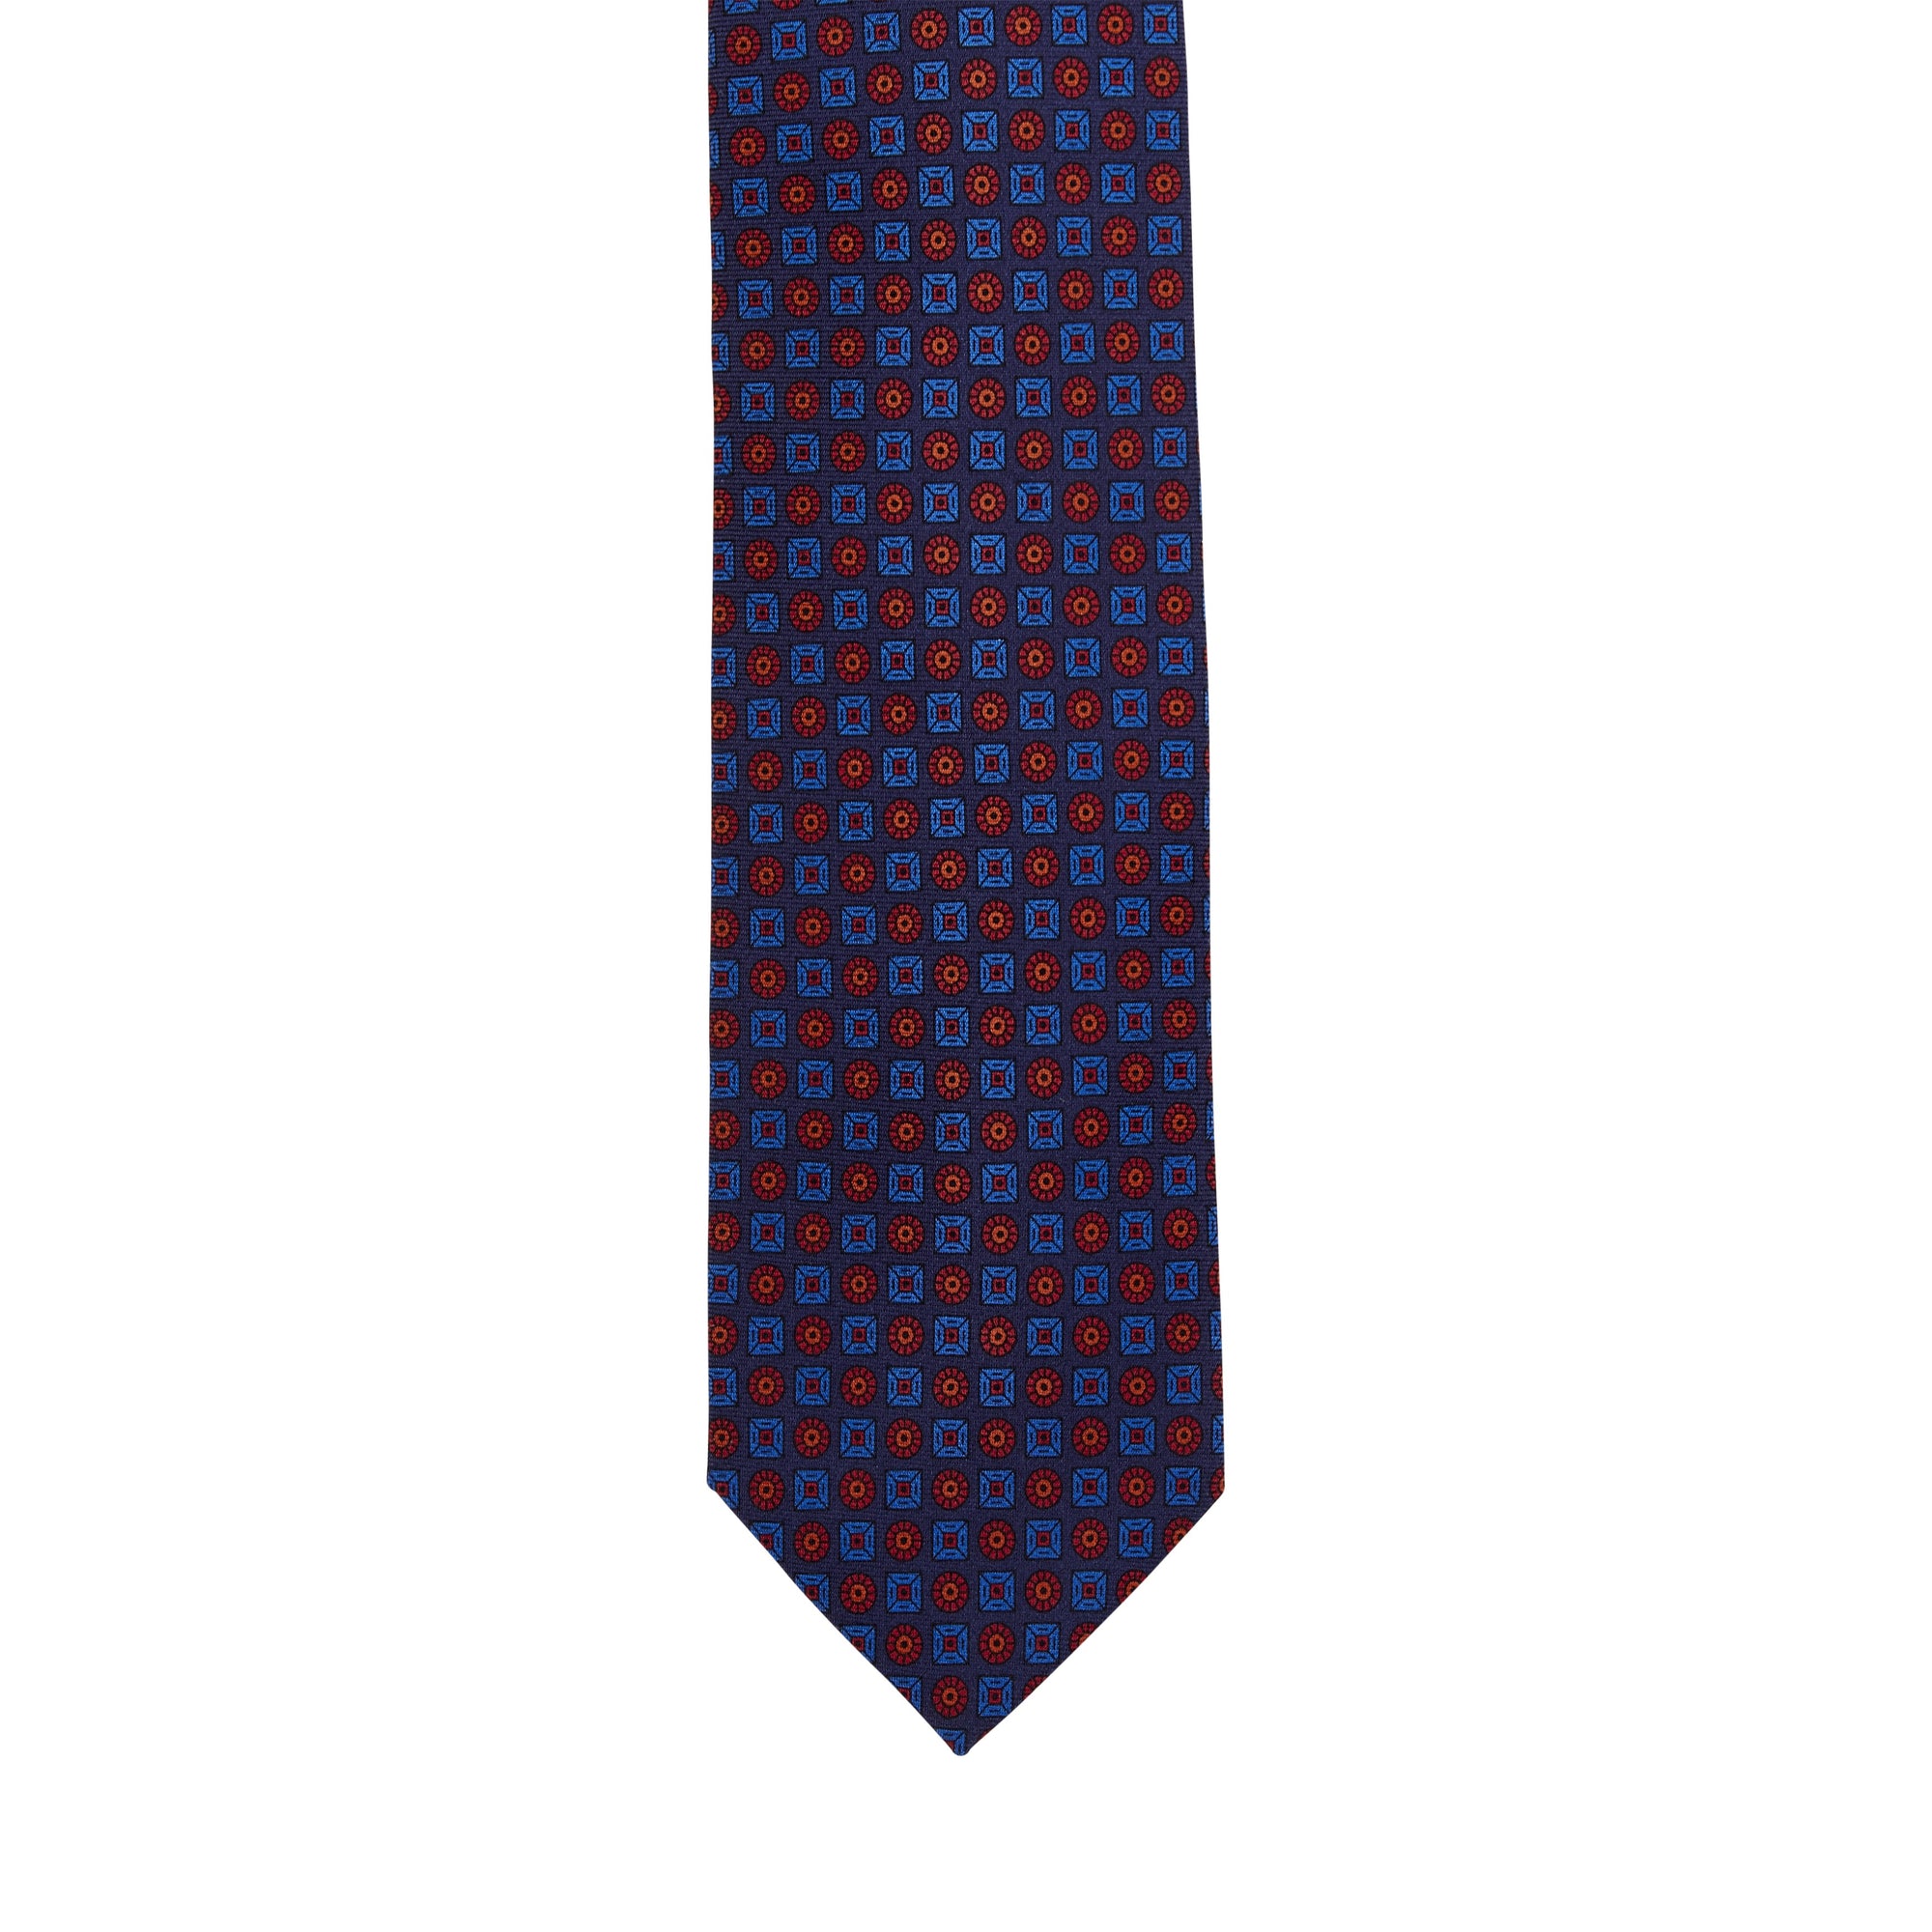 A handmade KirbyAllison.com Sovereign Grade Navy Ancient Madder tie with a blue and red polka dot pattern, crafted from 100% English silk in the United Kingdom.